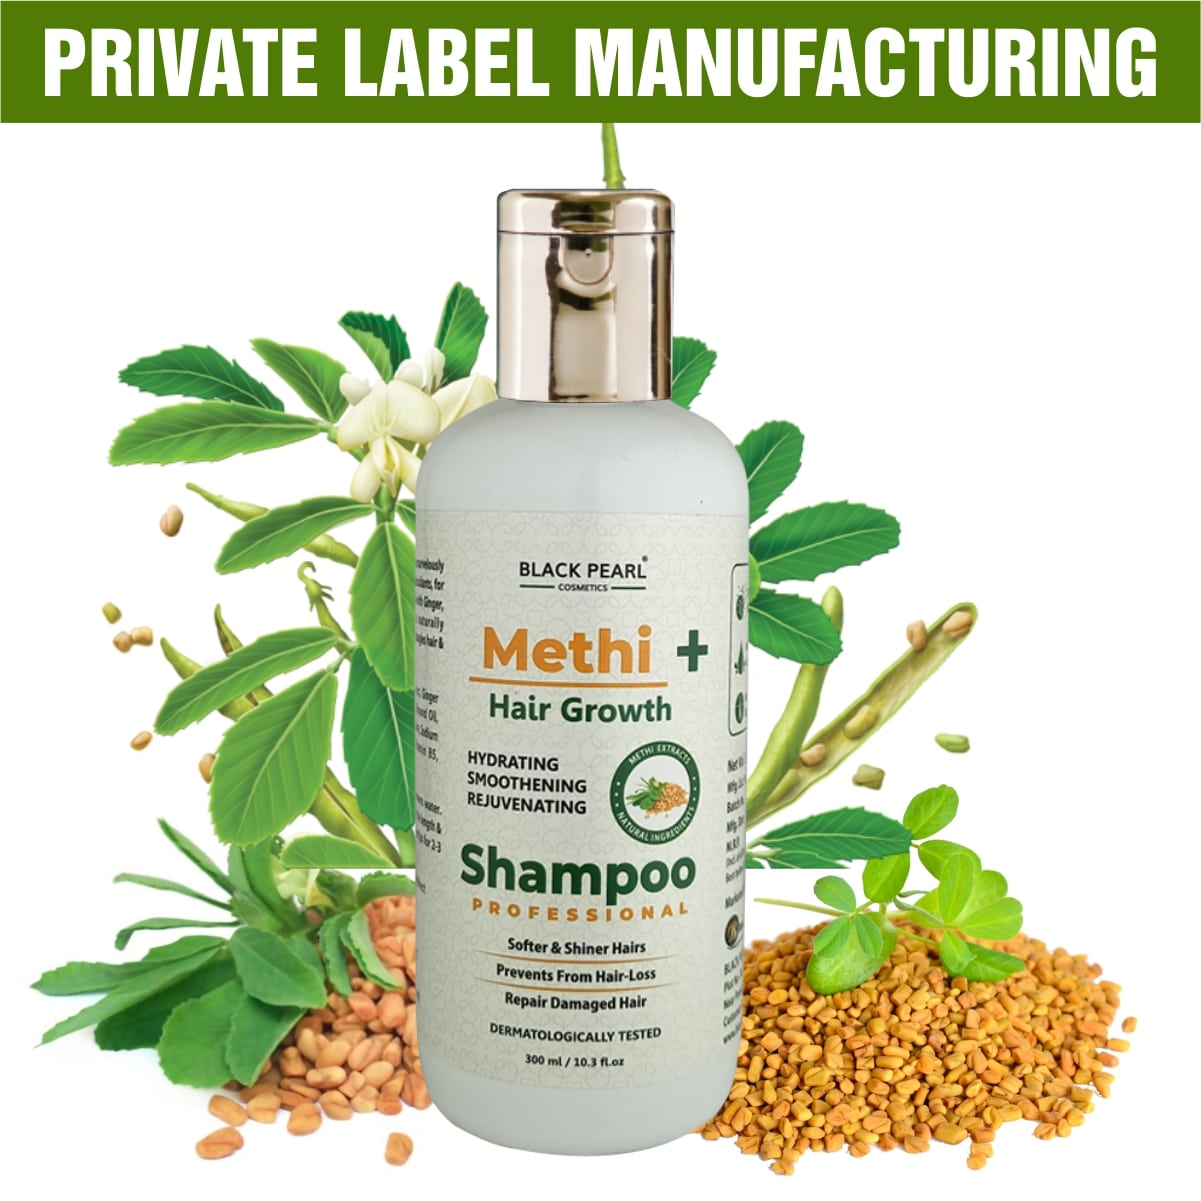 Methi Hair Growth Shampoo Private Label Manufacturing